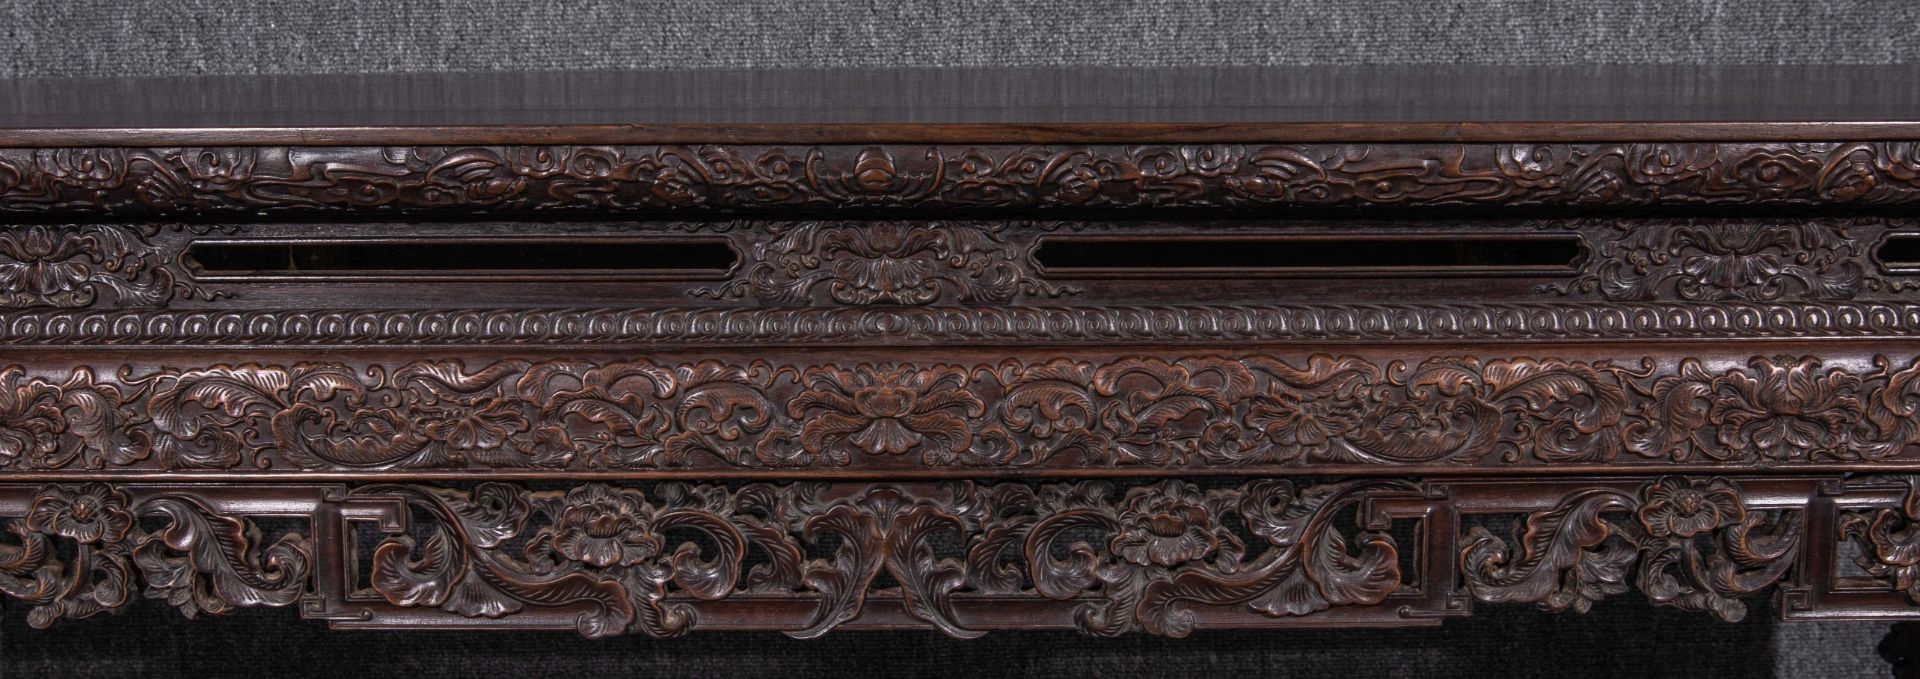 Chinese Qing Dynasty rosewood desk - Image 5 of 10